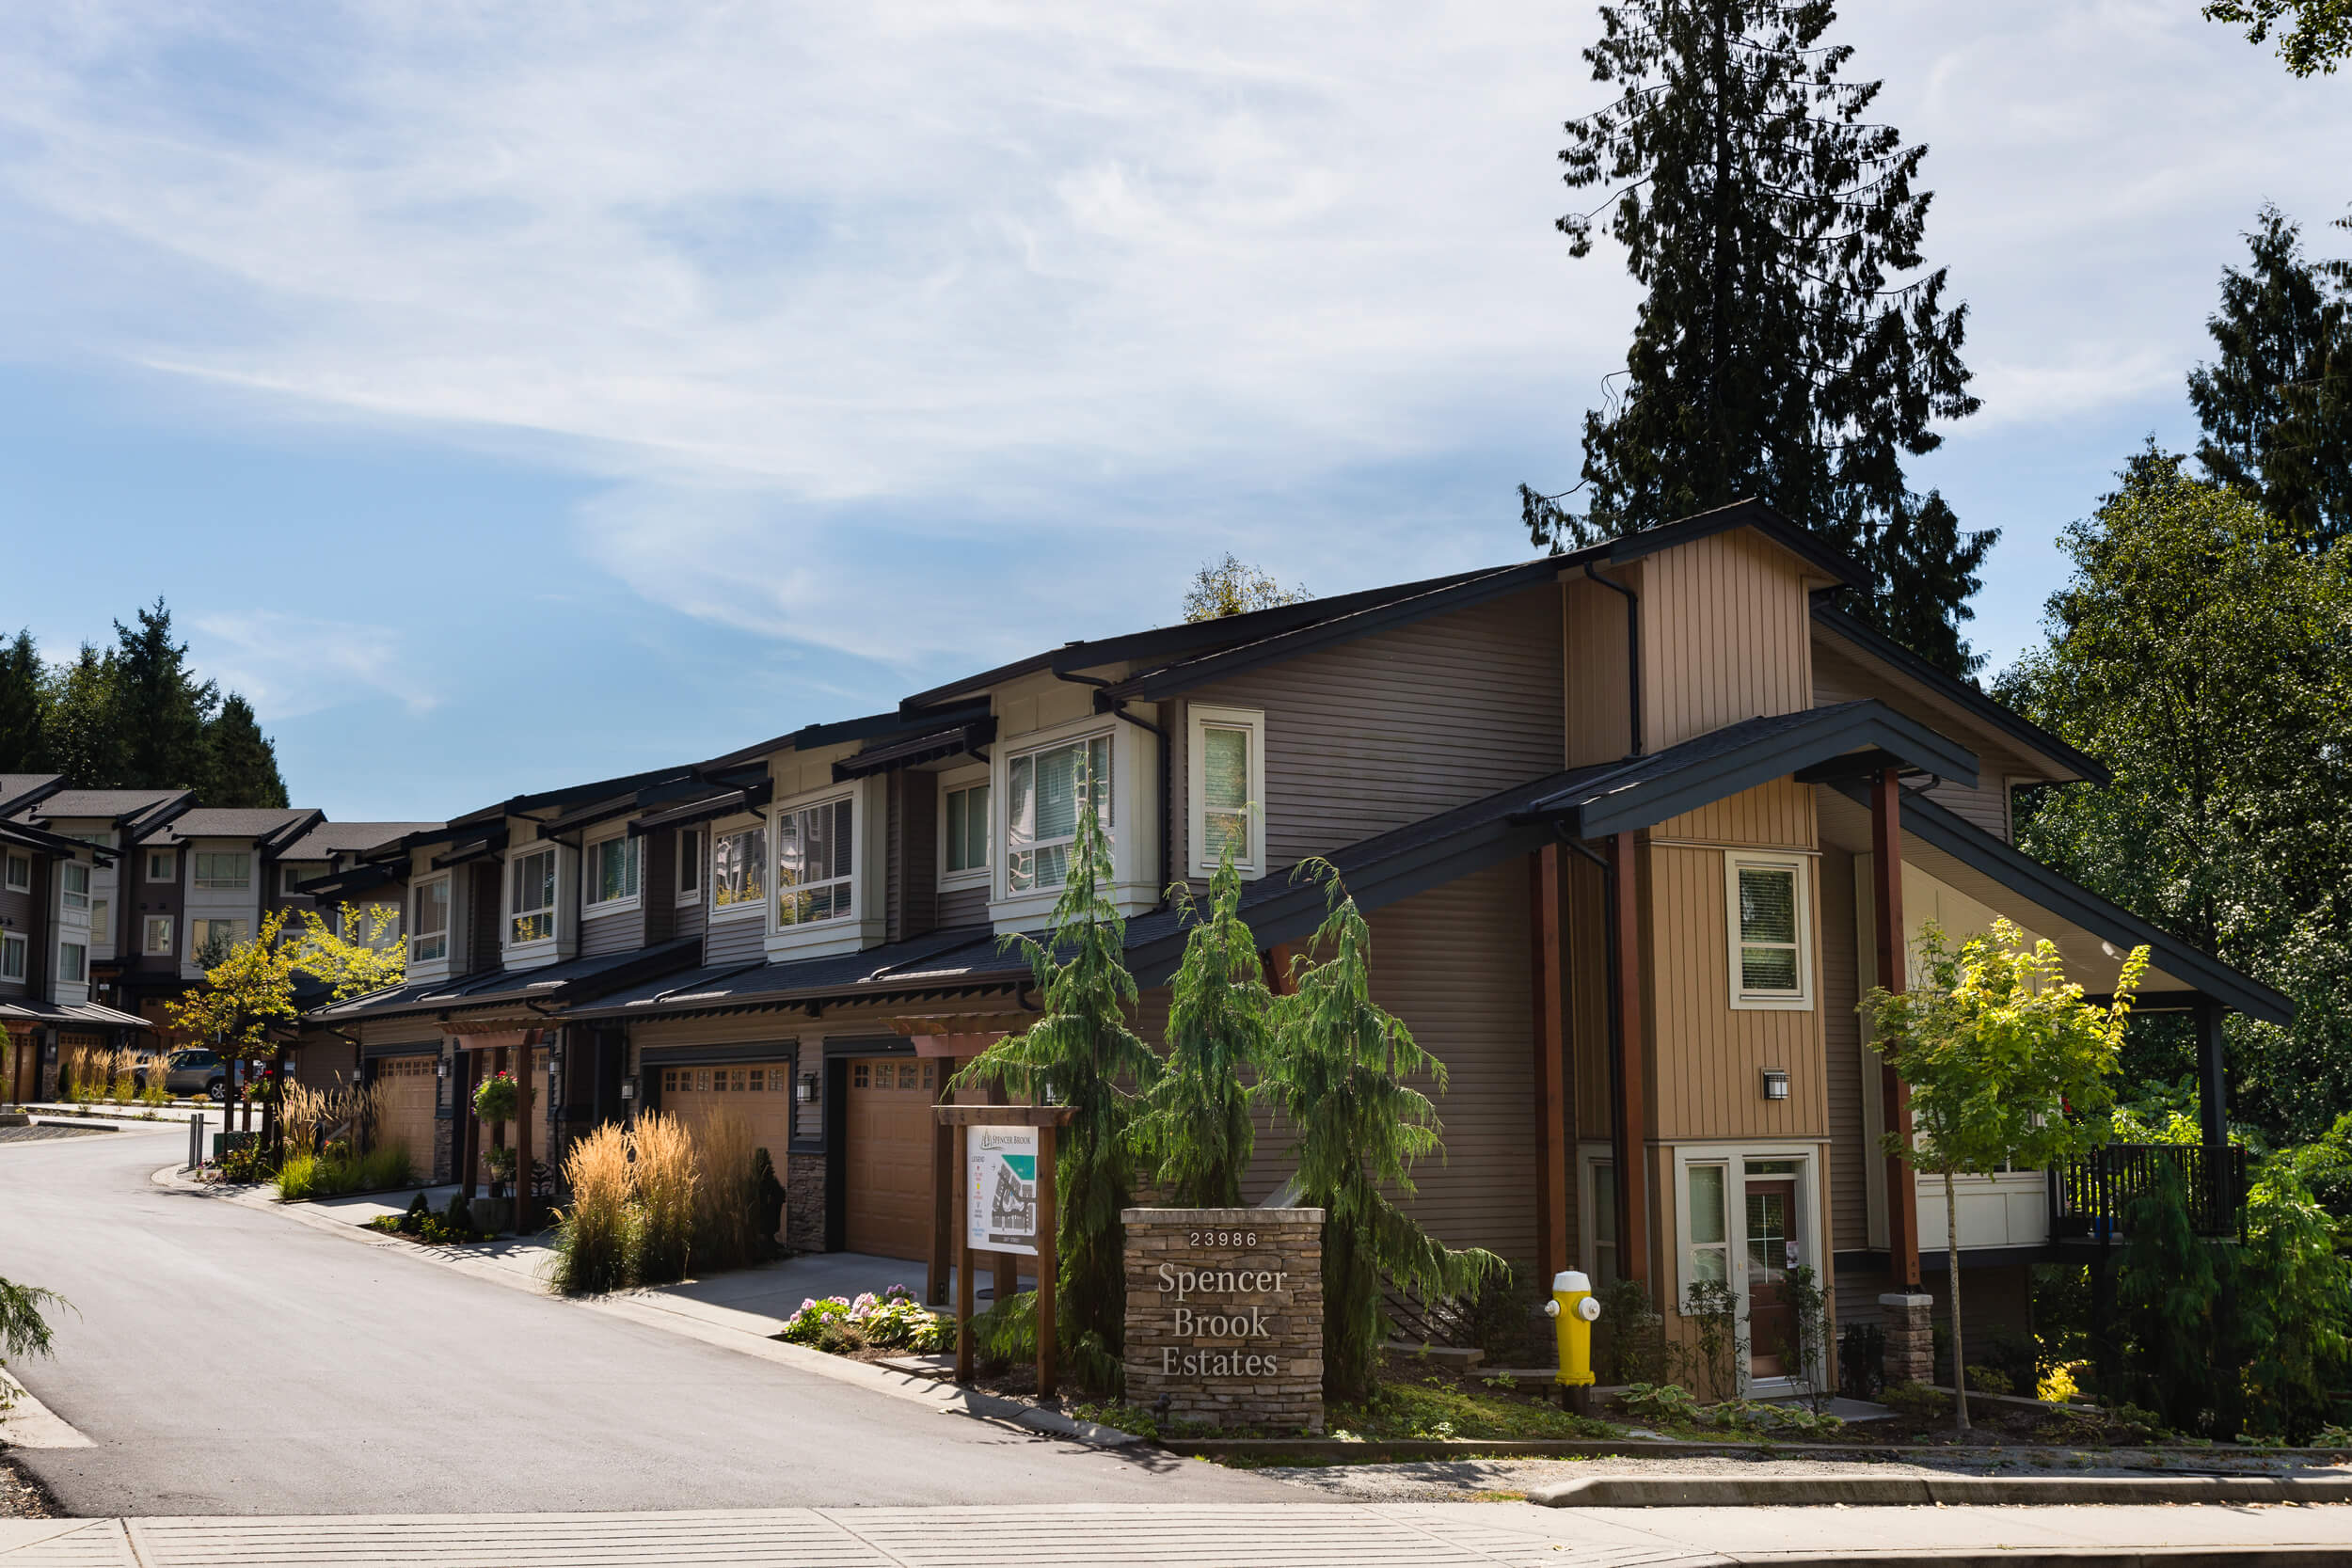 The “Spencer Brook” development is a residential 40 unit townhouse project located at Maple Ridge. Design by Group 161 | Atelier Pacific Architecture.